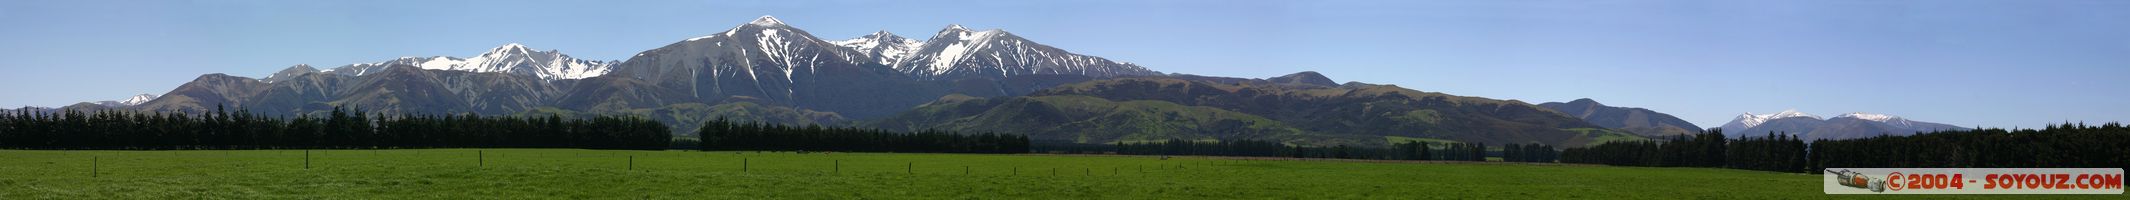 On State Highway 73 to Arthur's Pass - panorama
Mots-clés: New Zealand South Island Montagne Neige panorama